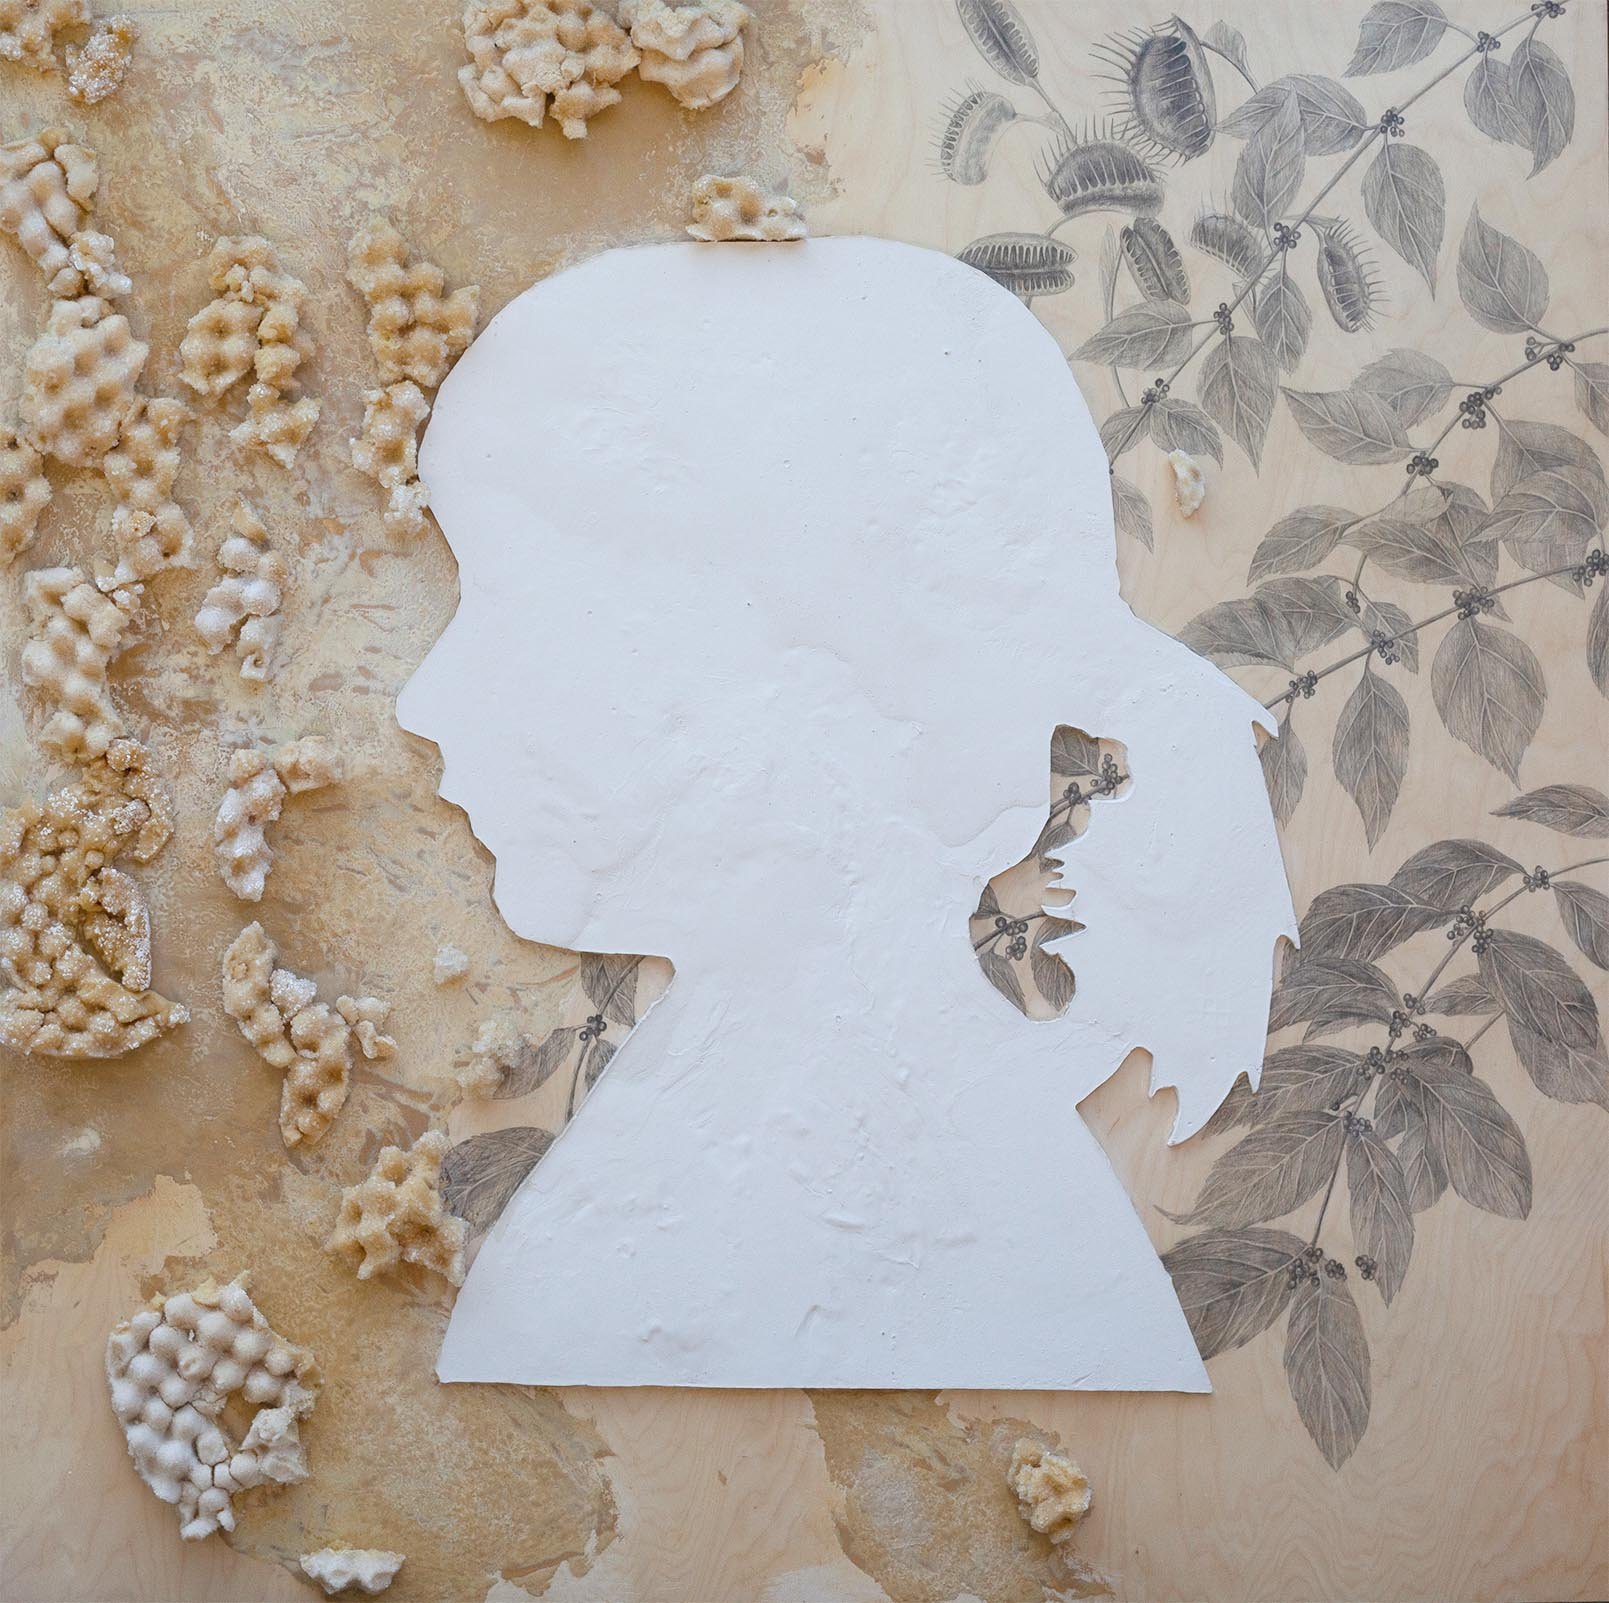 Carly Weaver,Silhouette #1, oil, pencil, plaster, foam, and crystals on wood, 60x60 2022.jpg